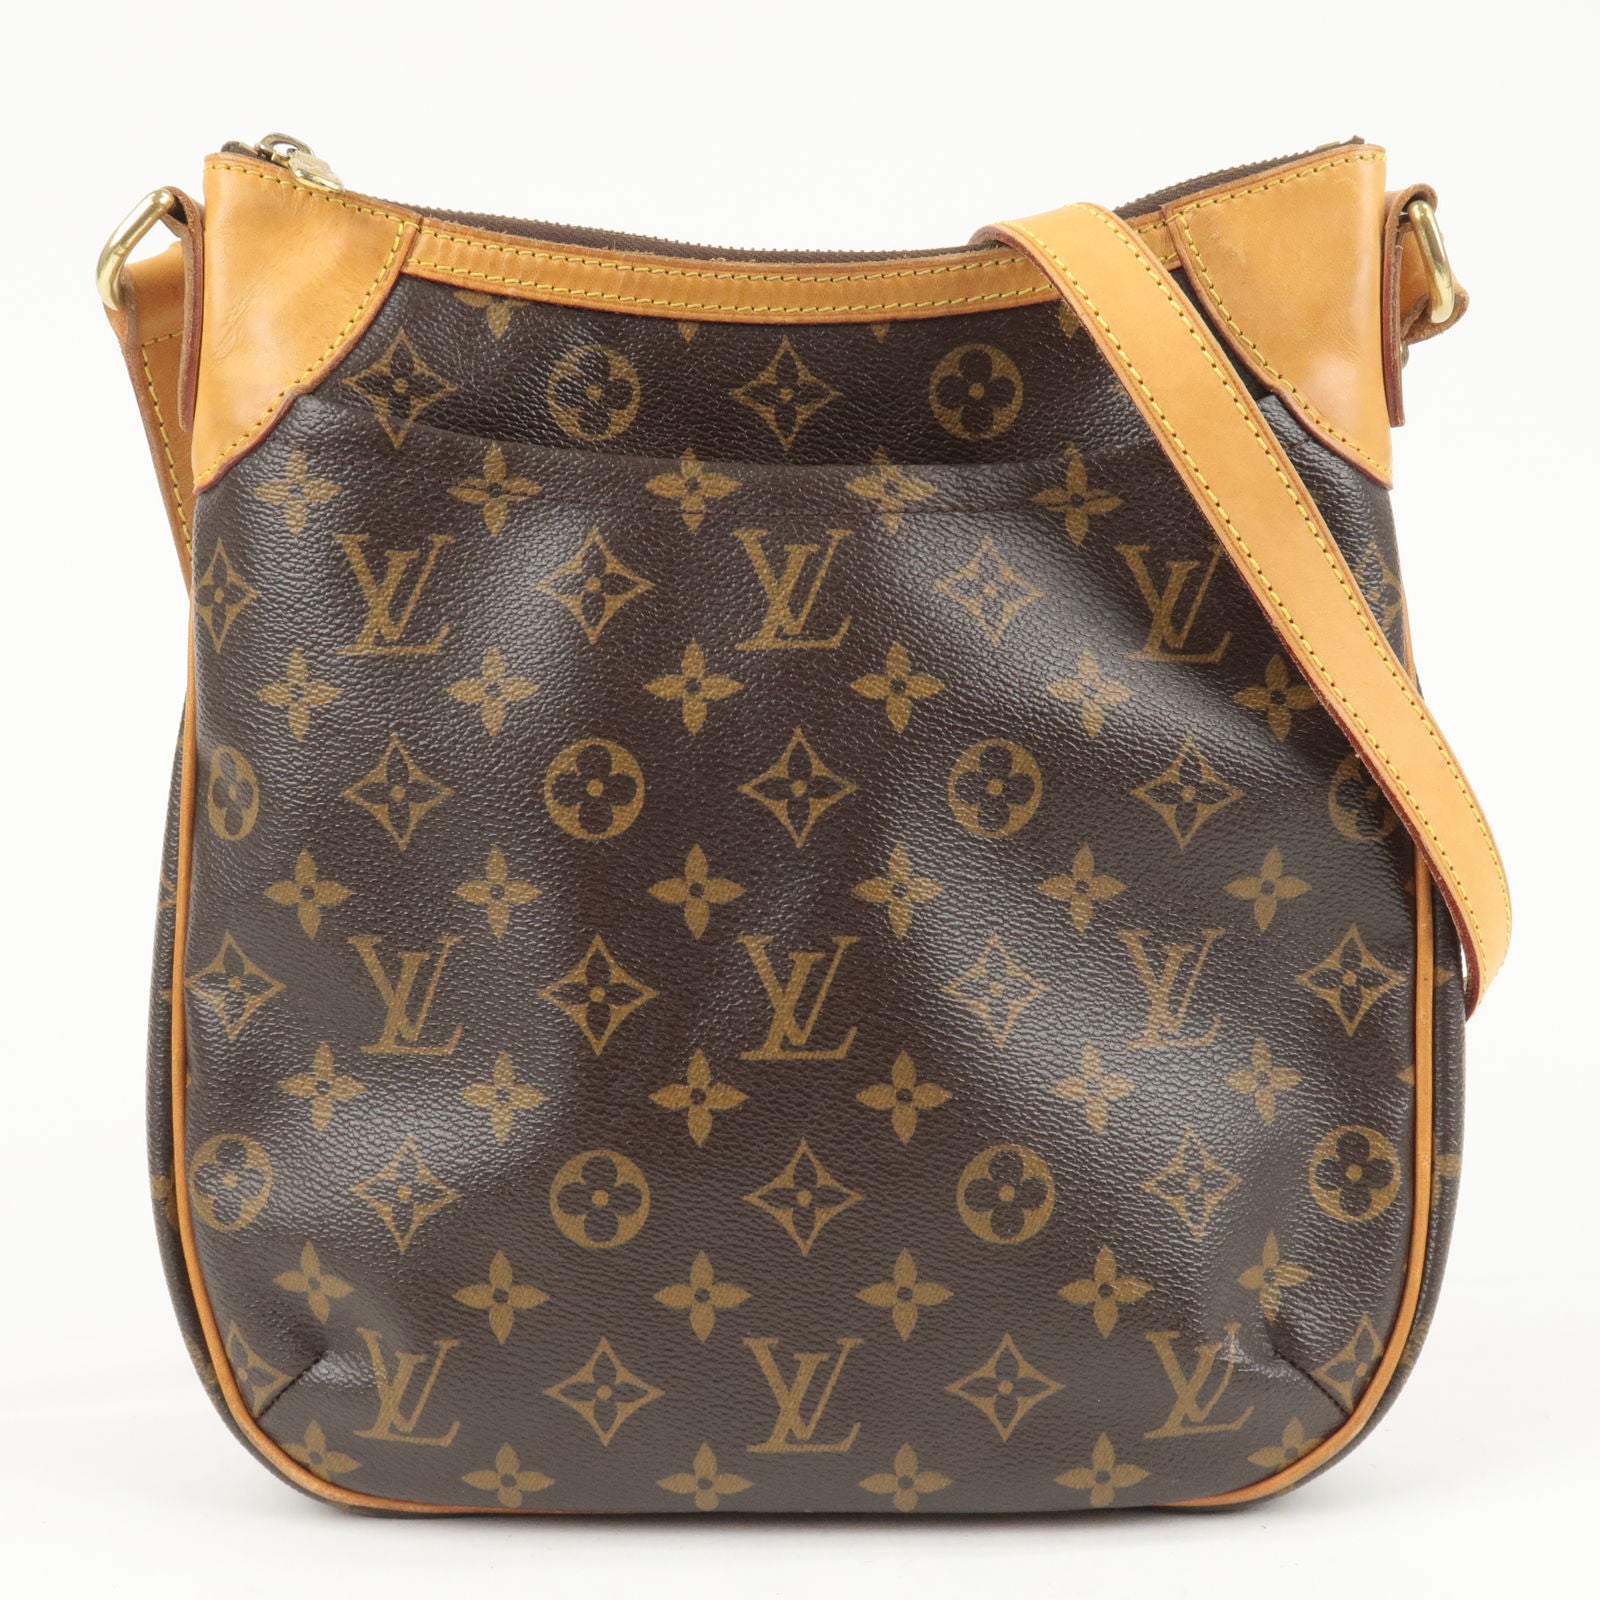 SHOWING MY NEW BAG- LOUIS VUITTON ODEON PM! 